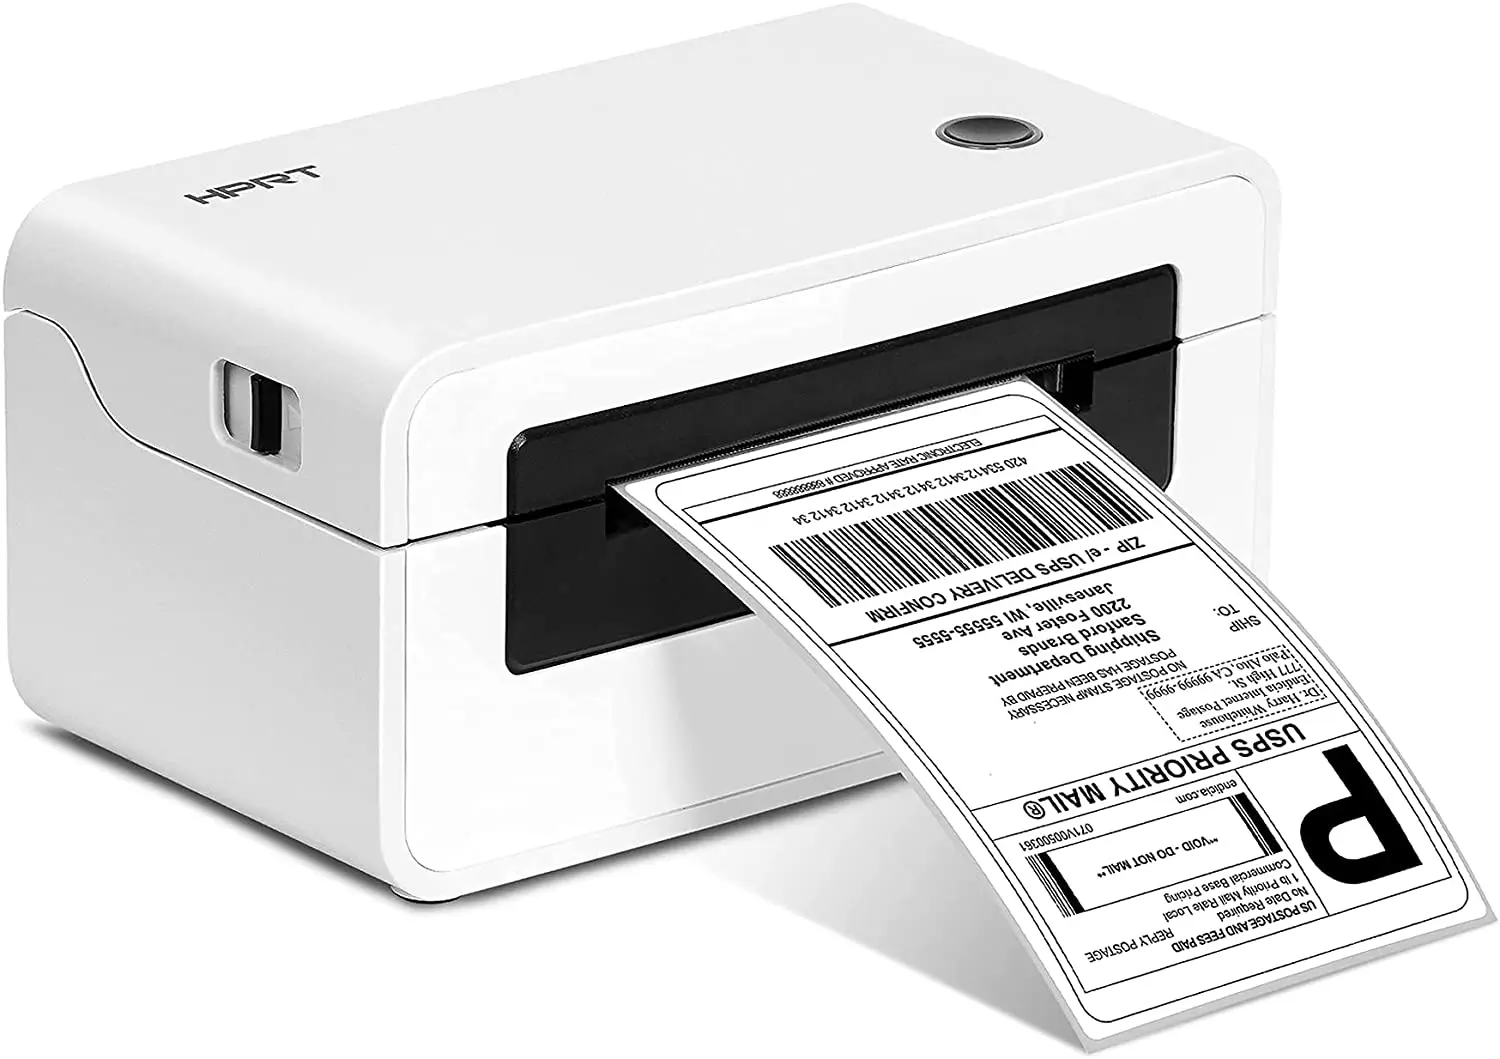 HPRT Desktop Thermal Label Printer Thermal Barcode Printer for Shipping Express Label Printing Support Computer Mac OS/Windows images - 6